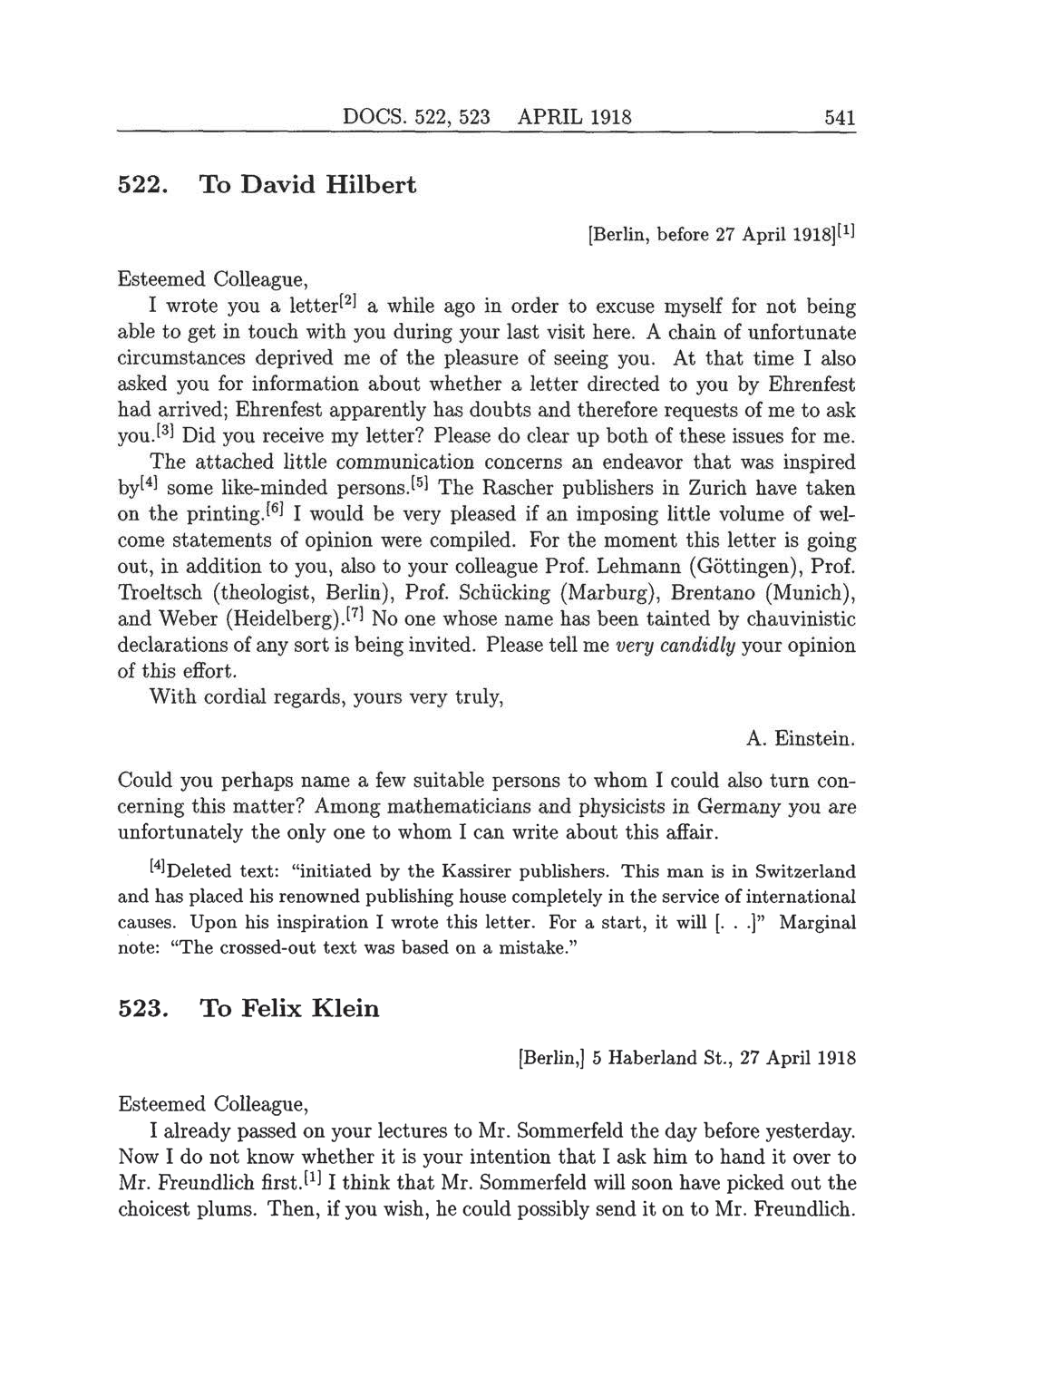 Volume 8: The Berlin Years: Correspondence, 1914-1918 (English translation supplement) page 541